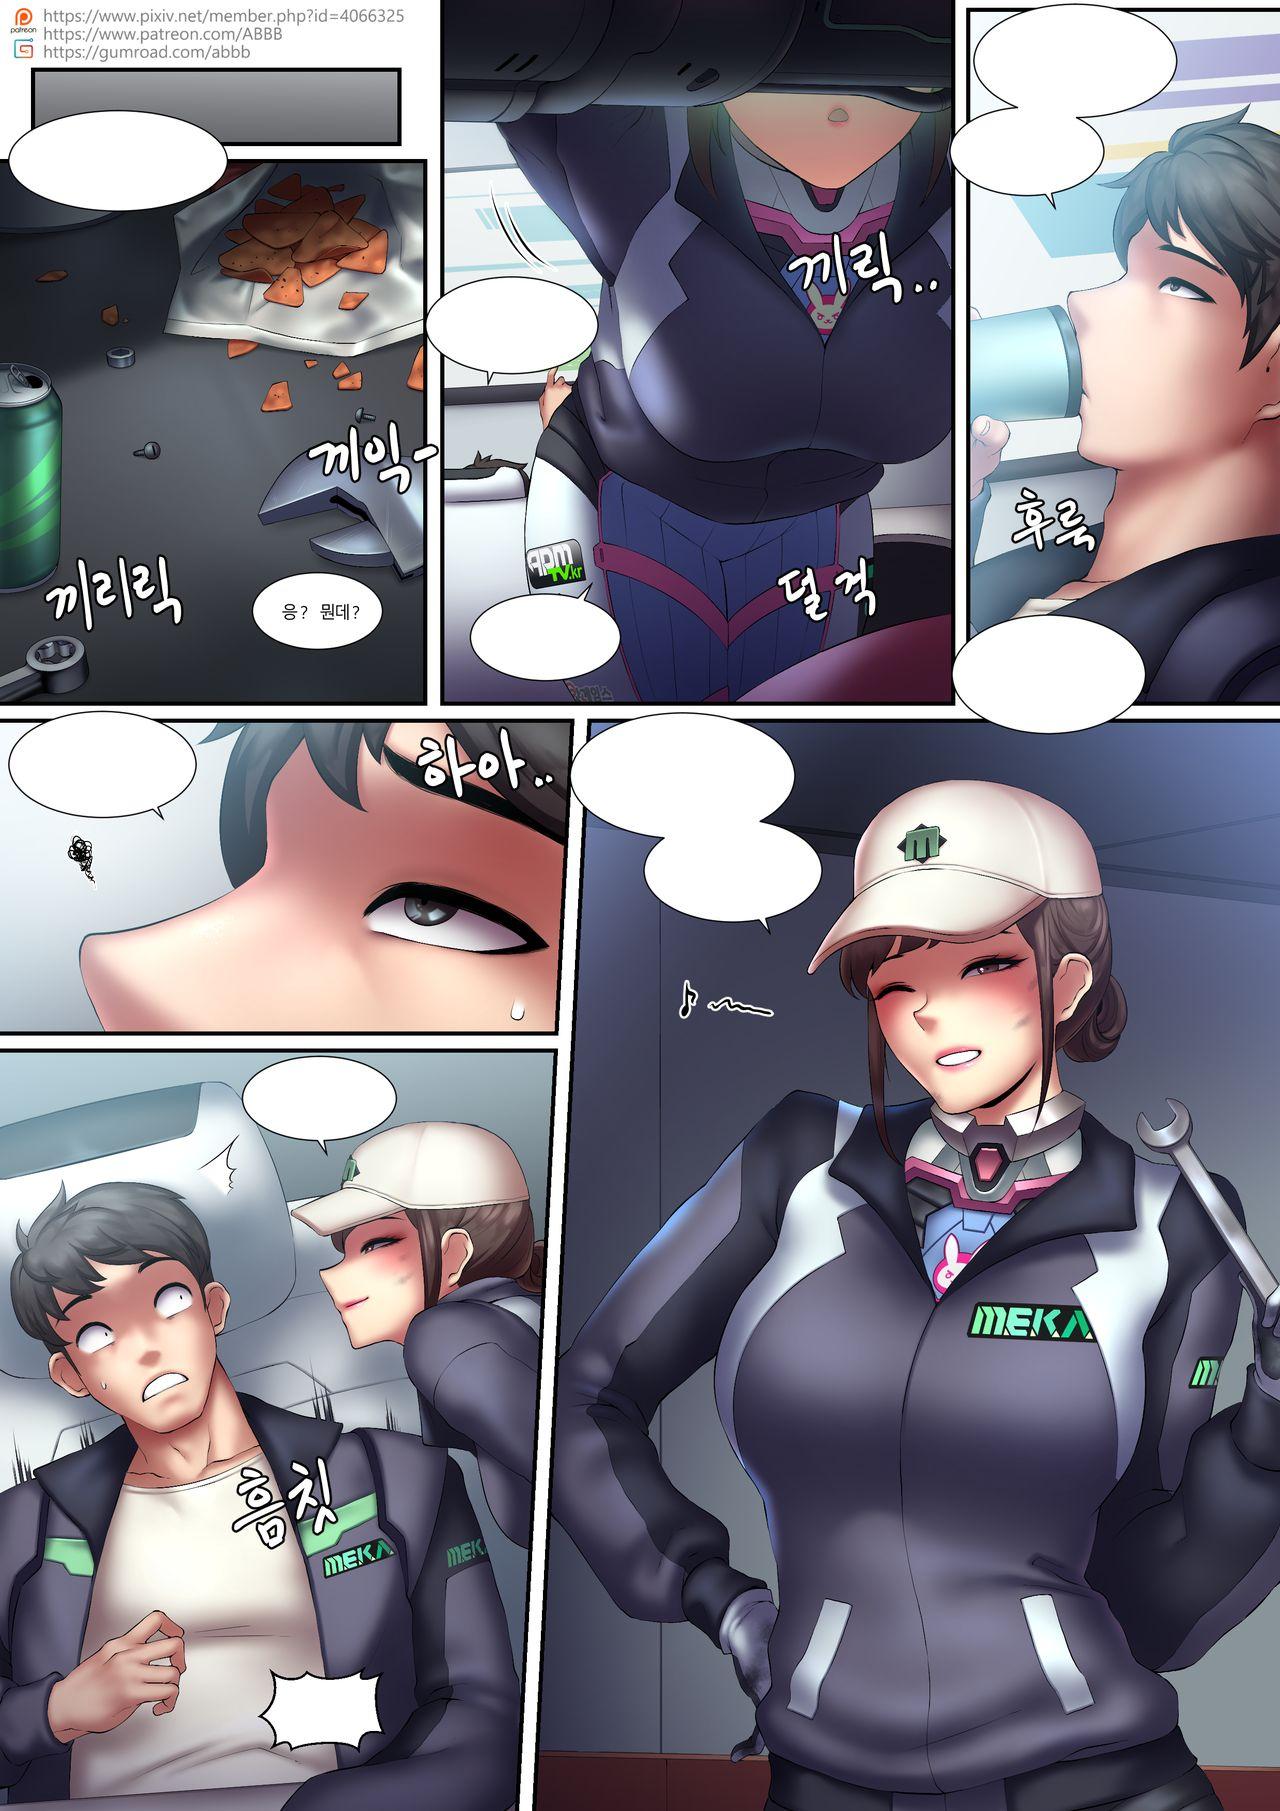 Shavedpussy Shooting Star - Overwatch Cameltoe - Page 2